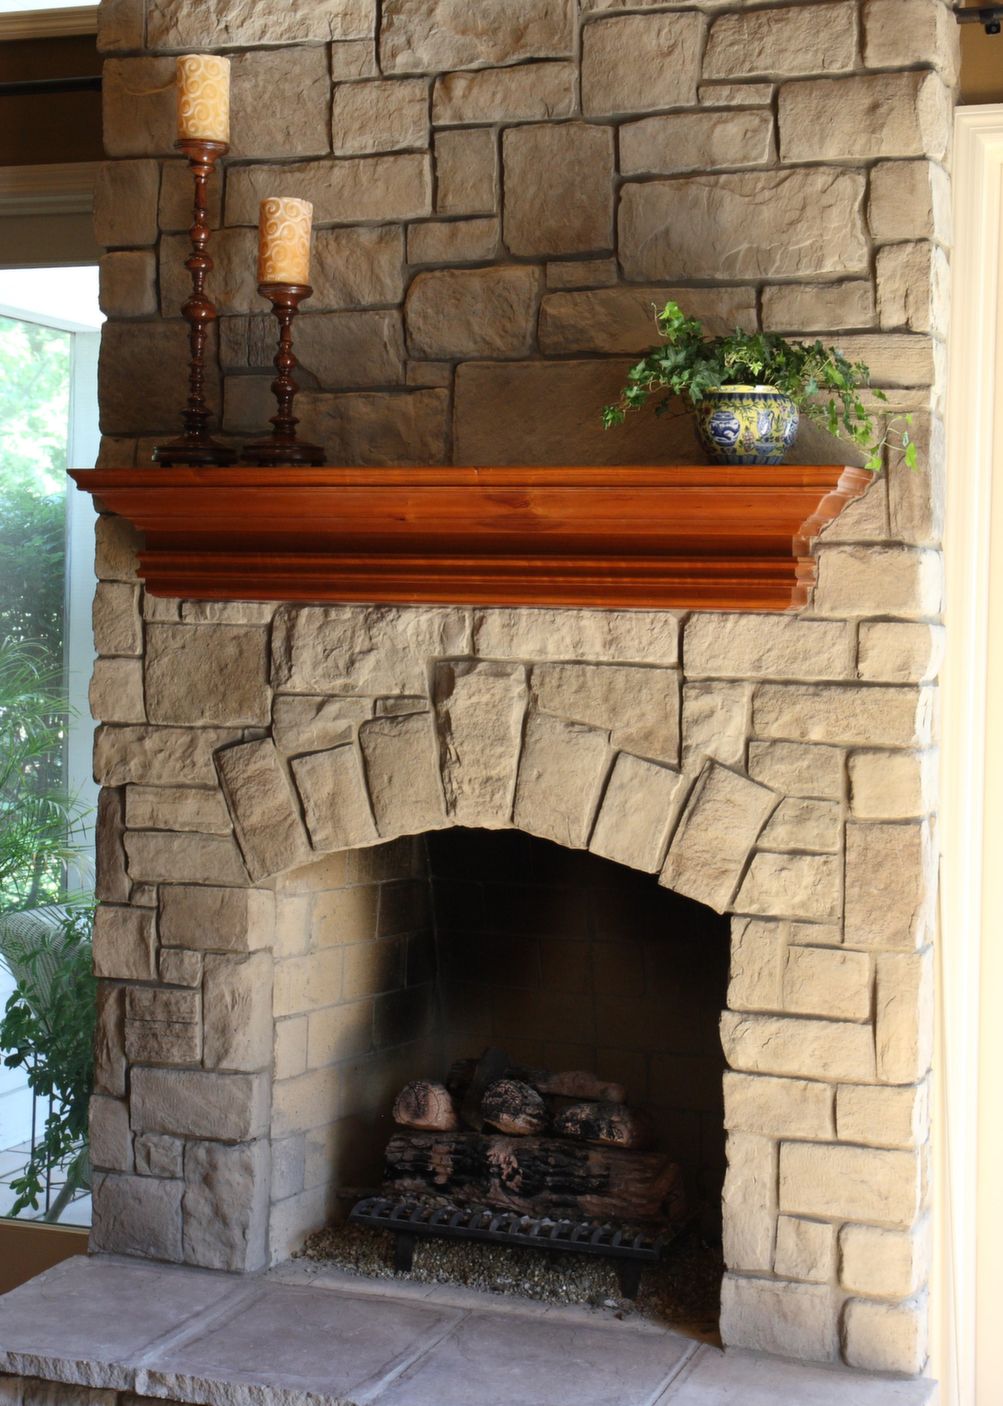 Cover Brick Fireplace Inspirational Stone for Fireplace Fireplace Veneer Stone